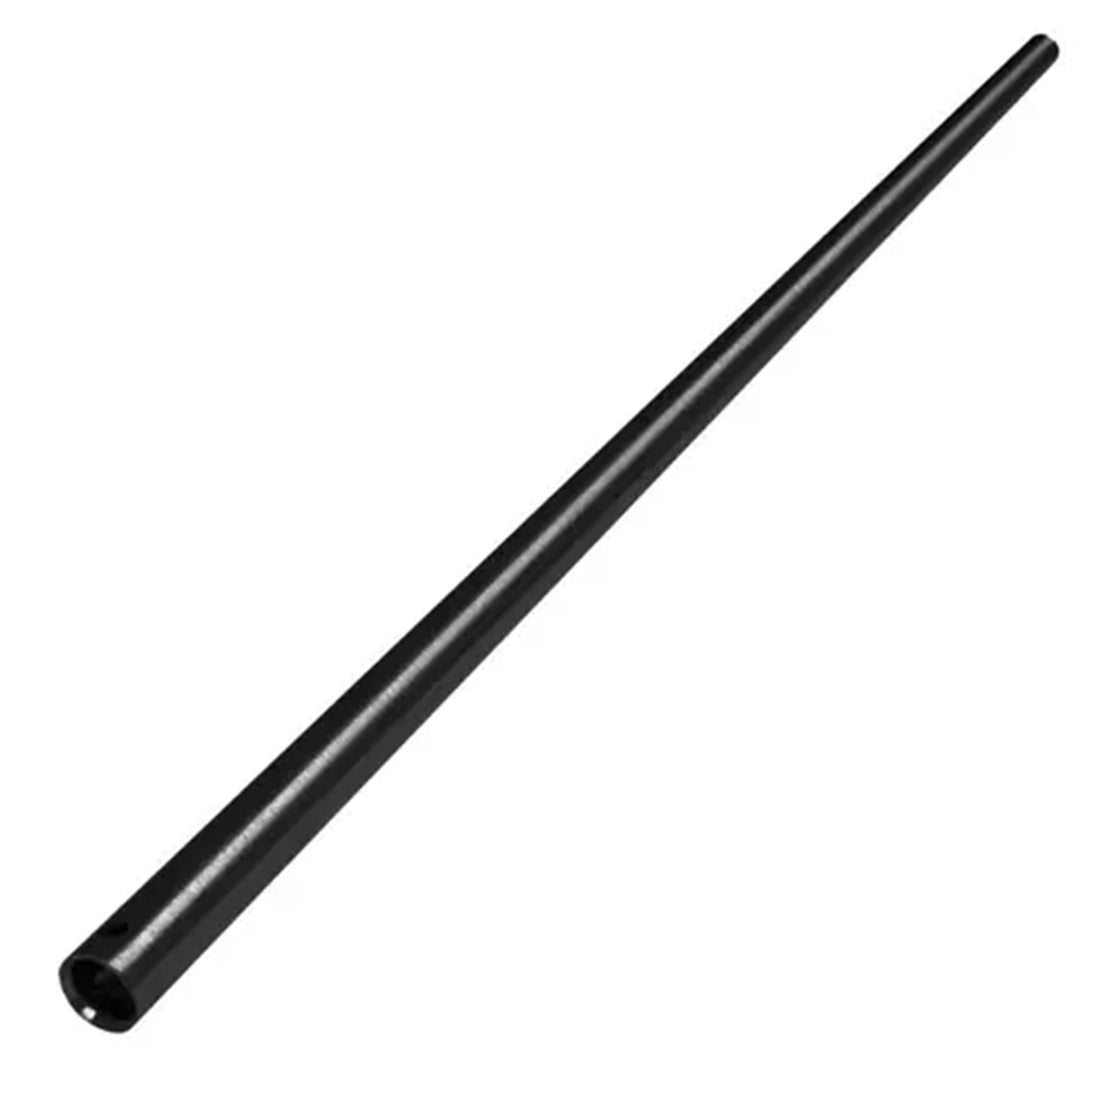 Downrod 900mm for Ceiling Fans